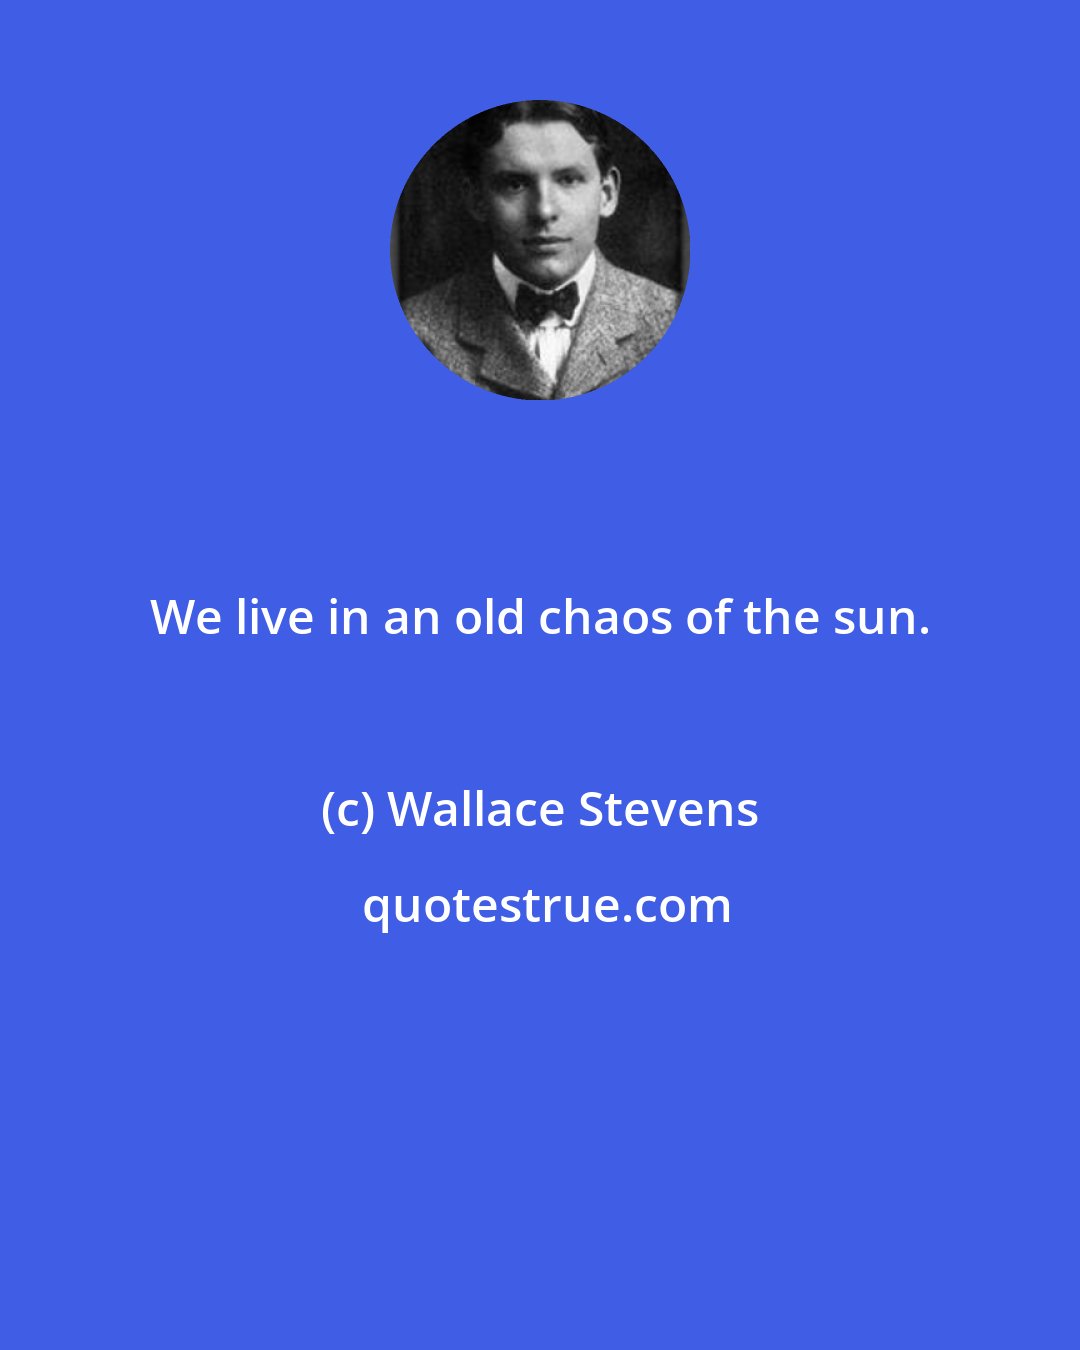 Wallace Stevens: We live in an old chaos of the sun.